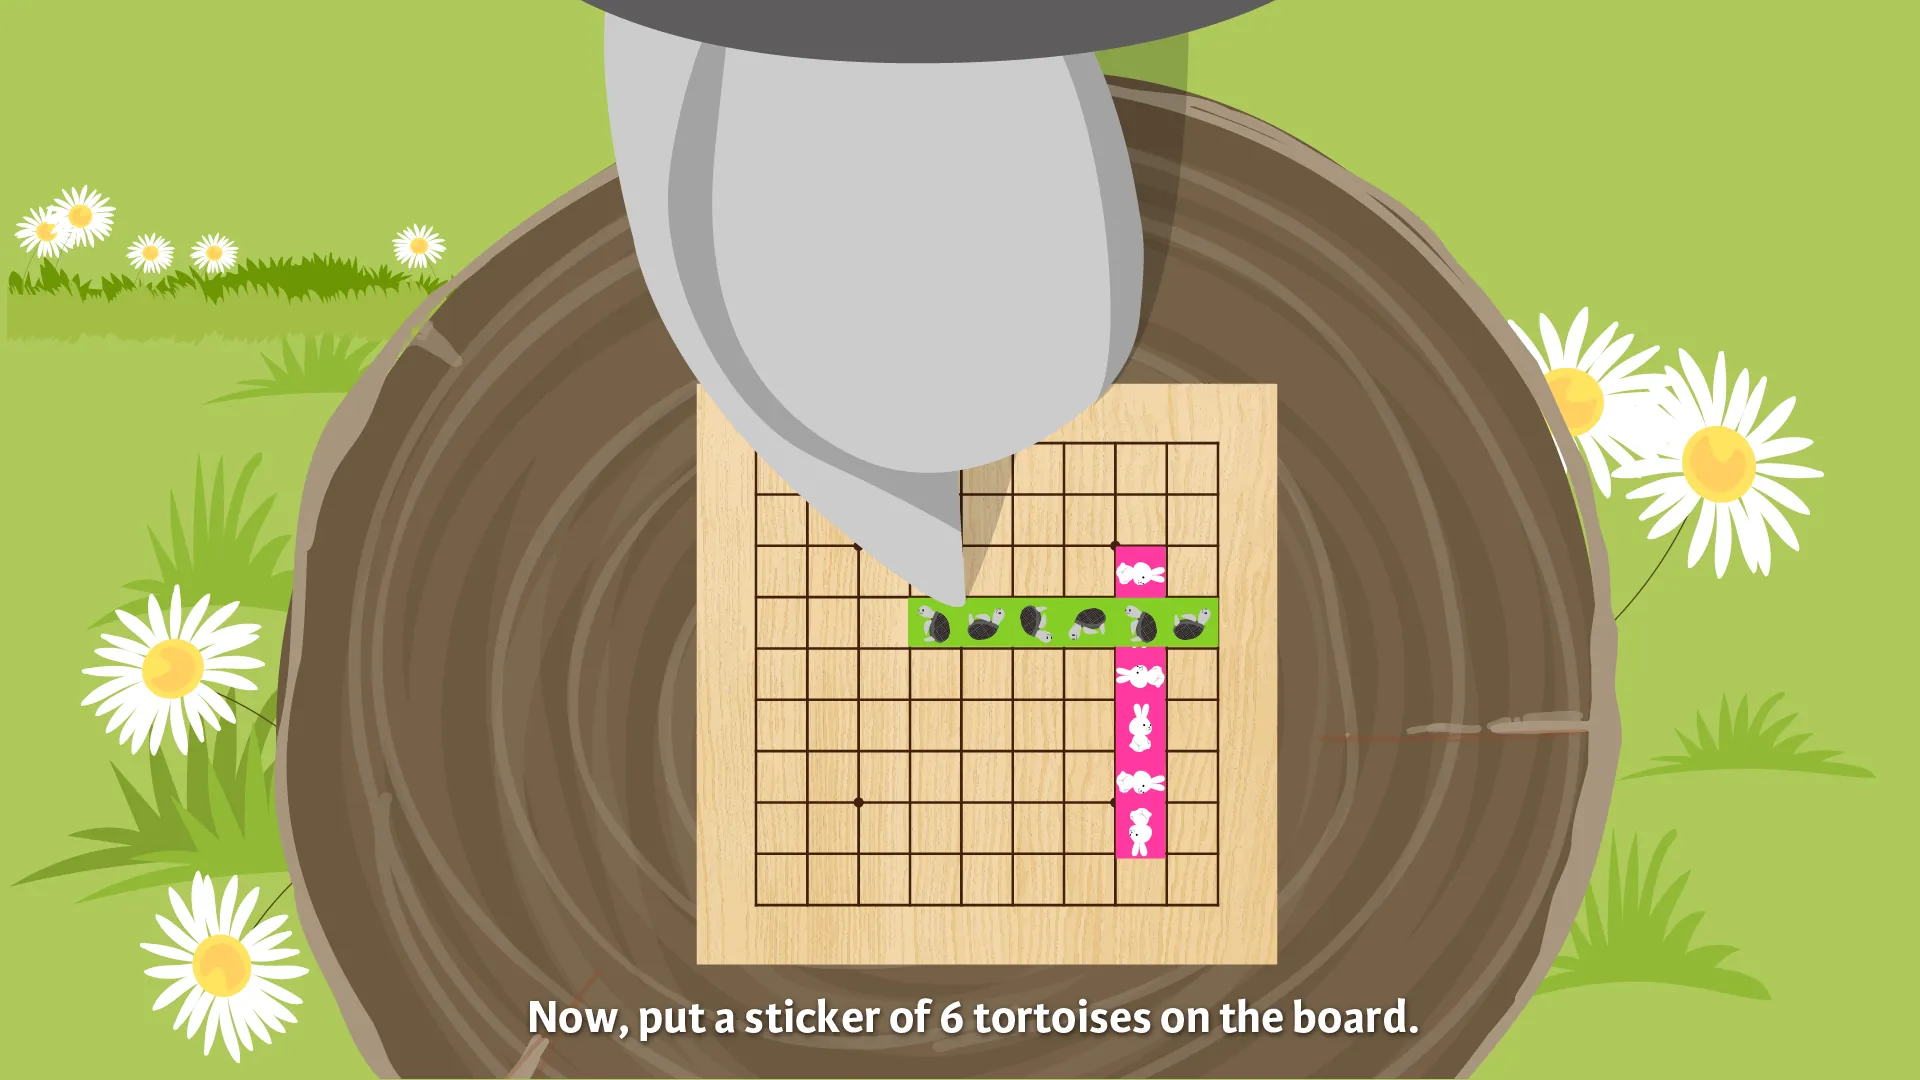 Now, put a sticker of 6 tortoises on the board.